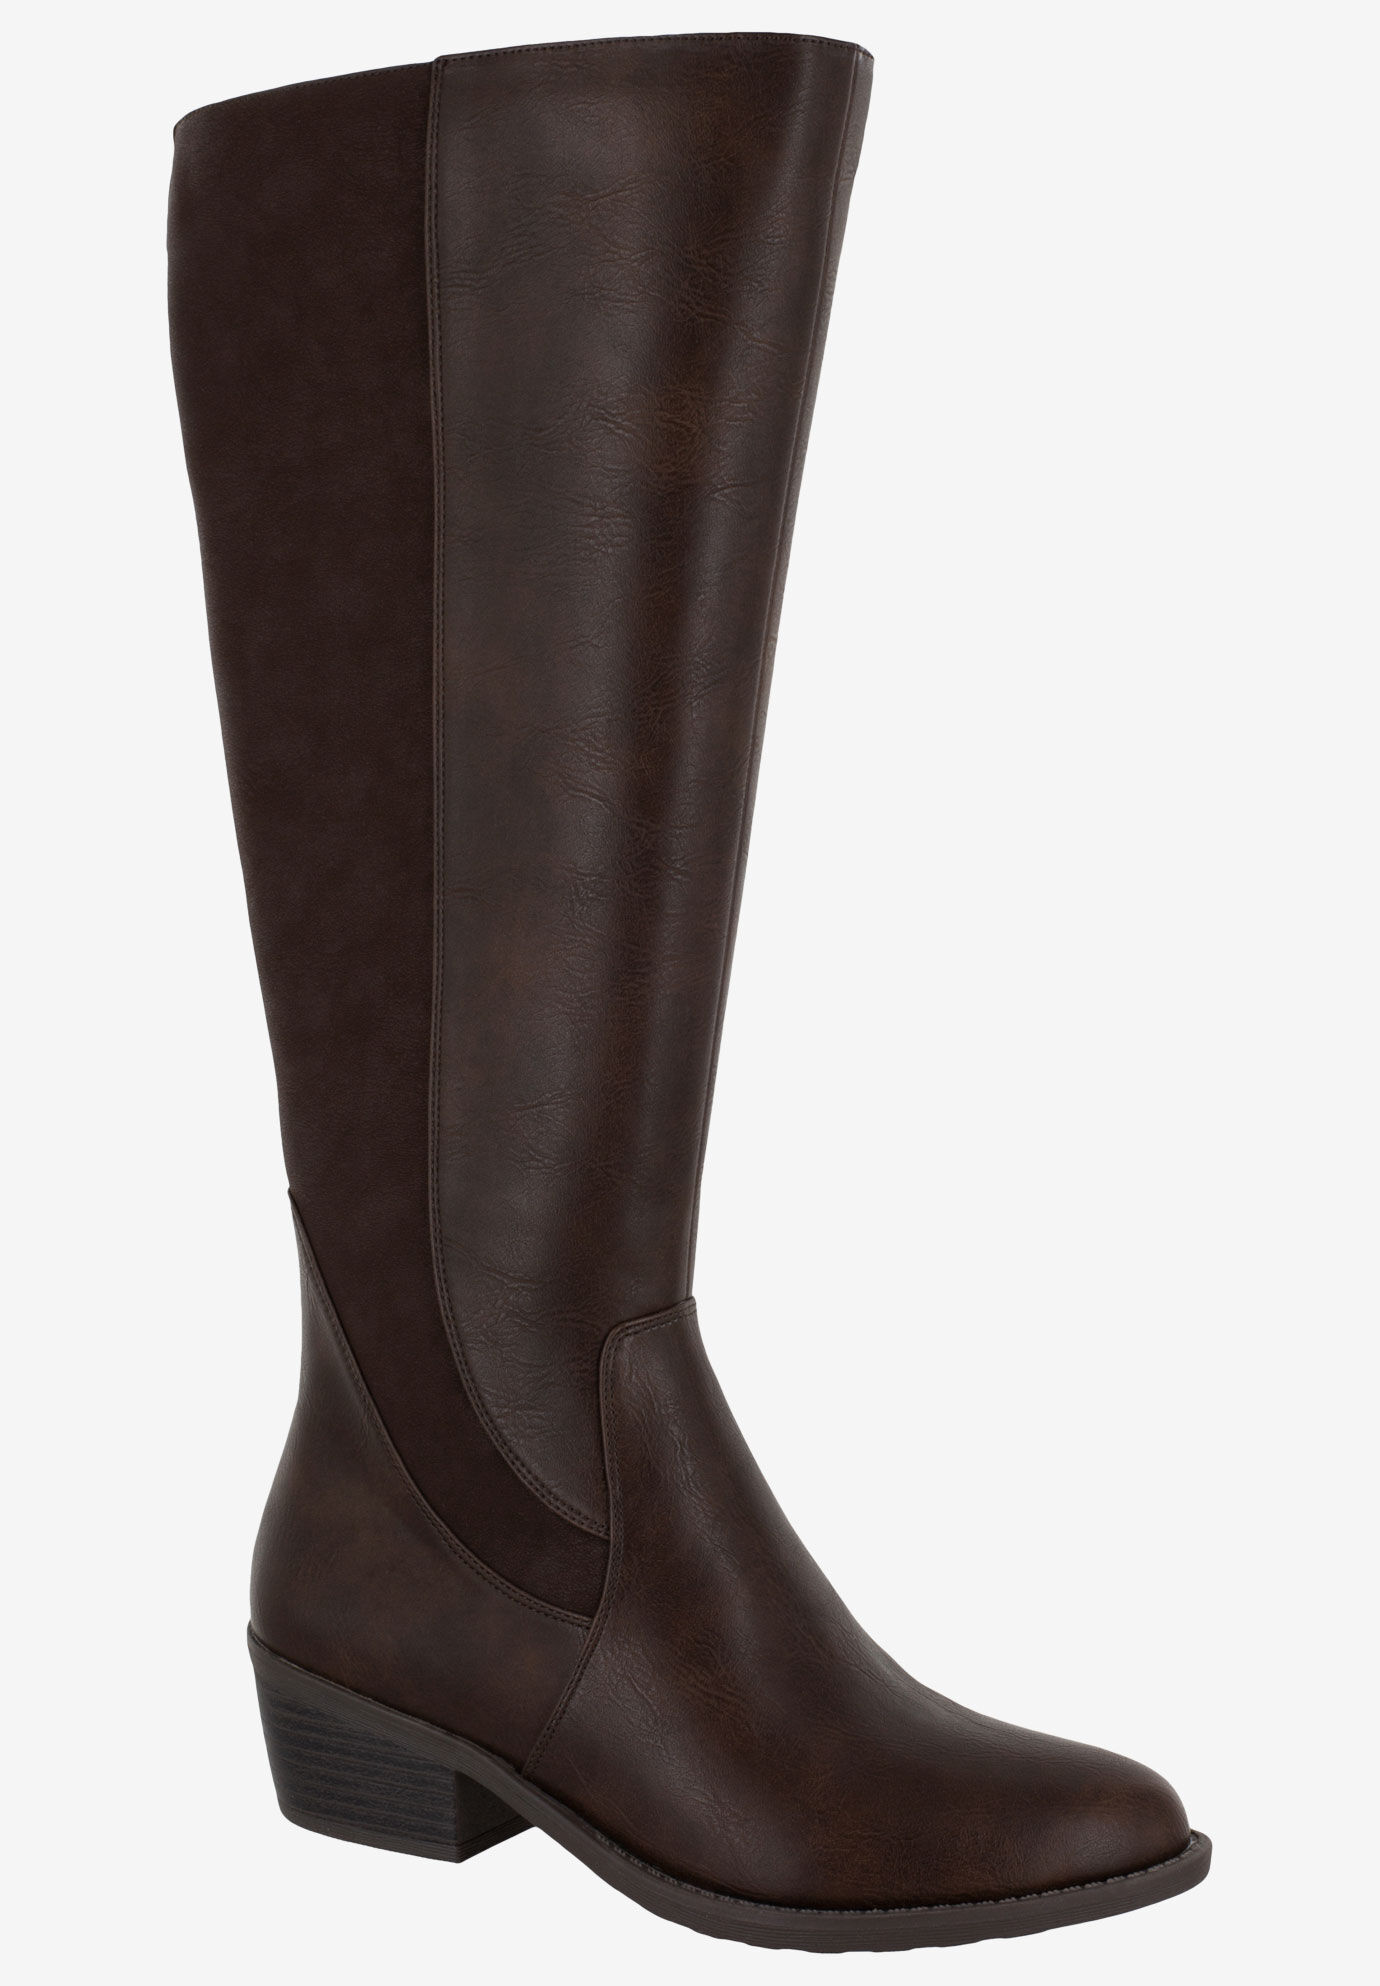 wide calf boots for plus size women